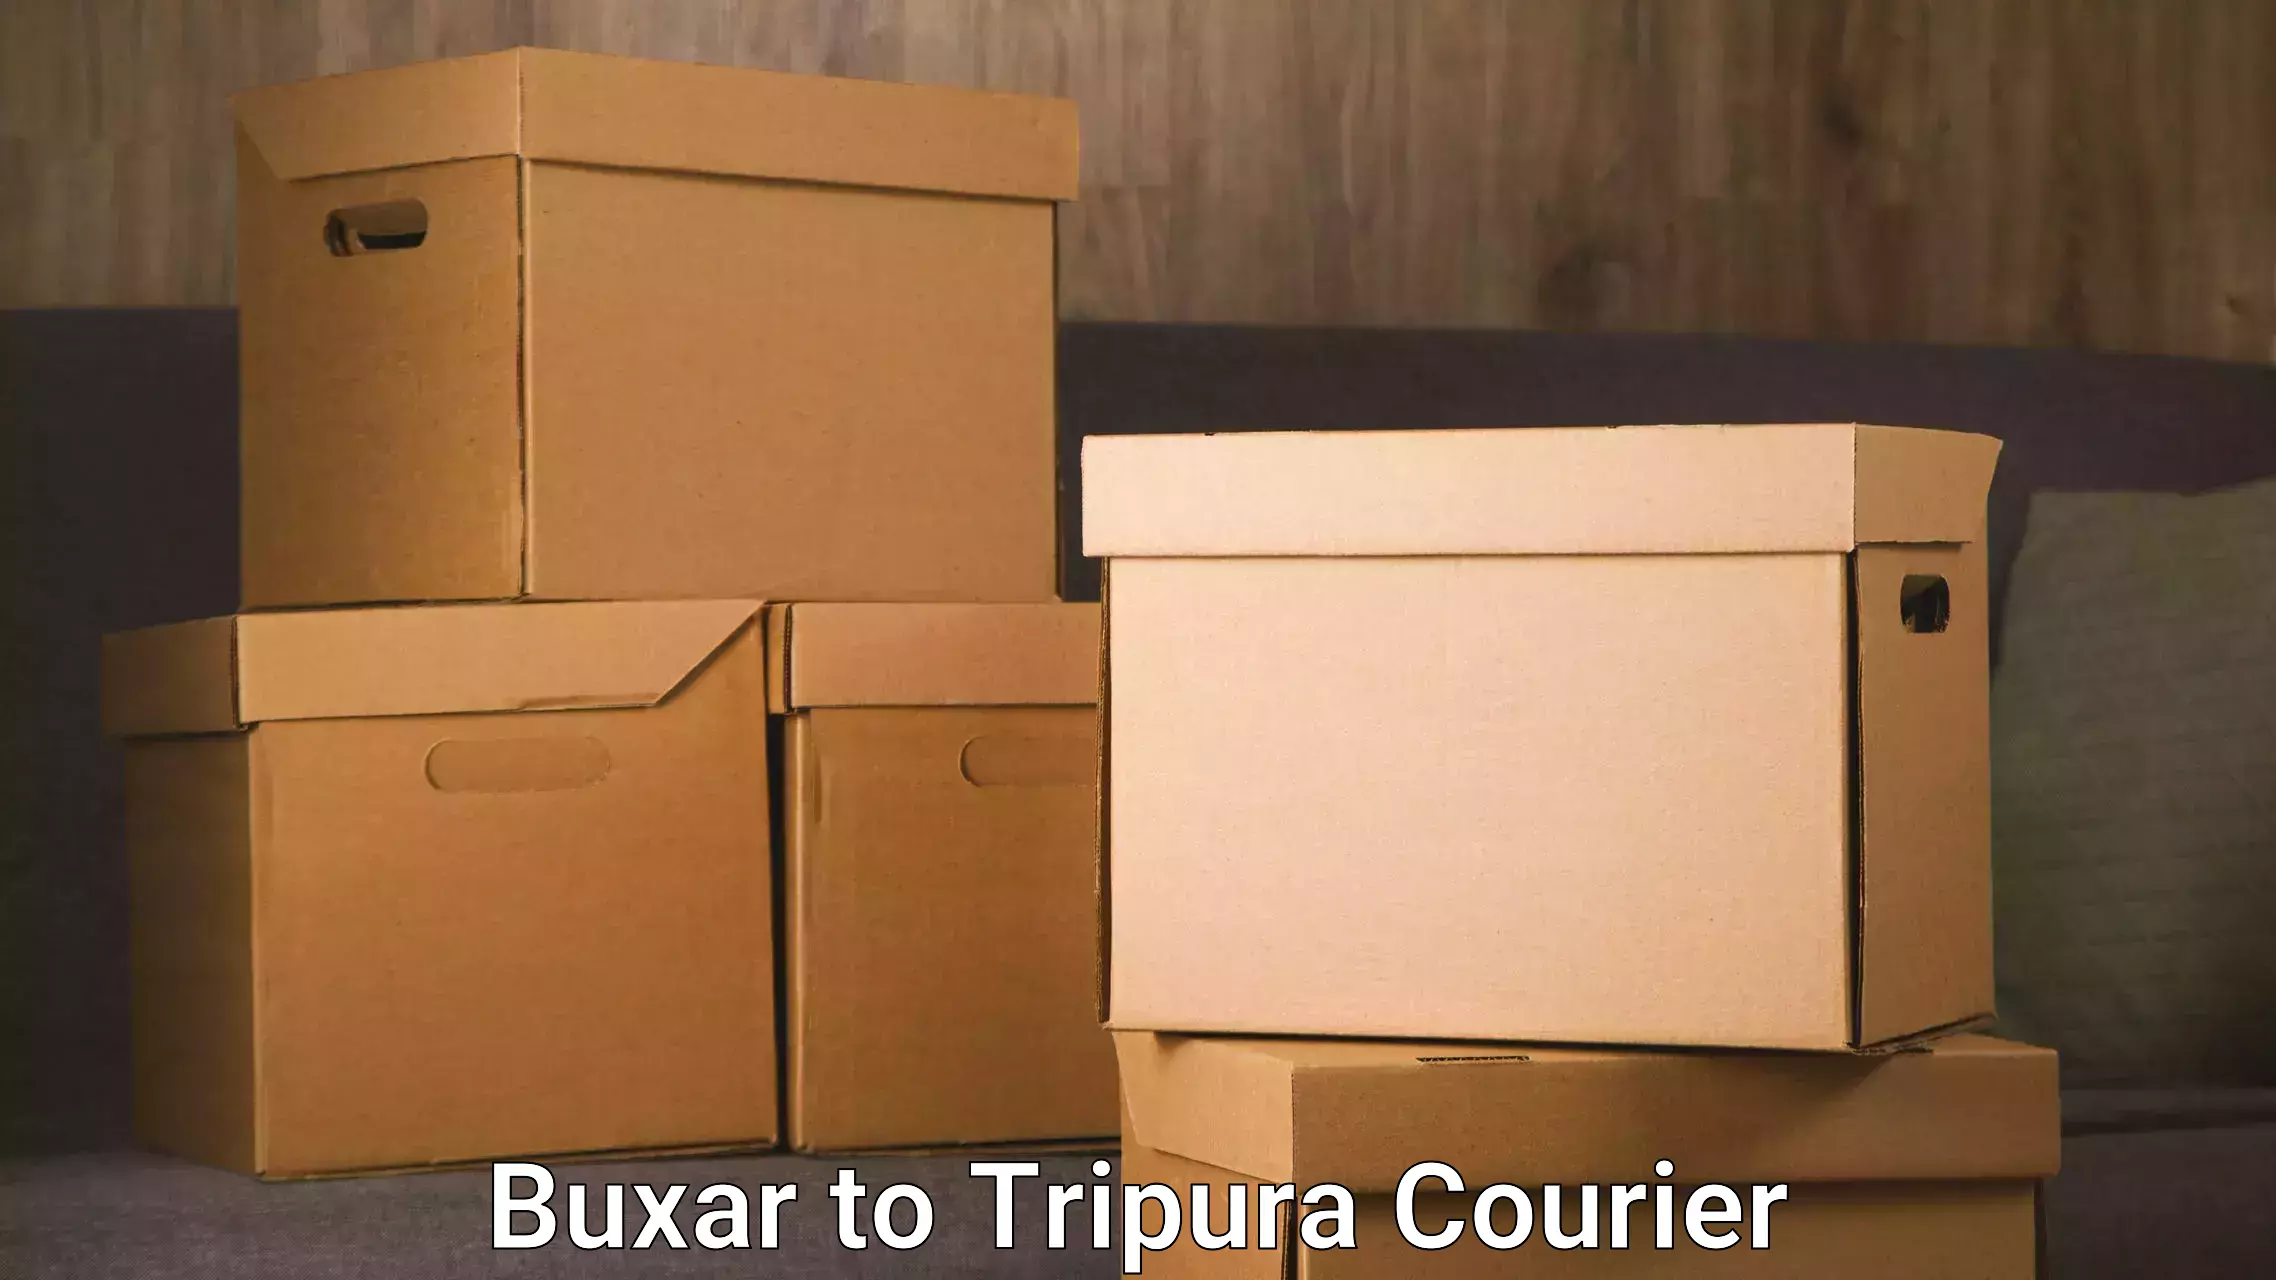 Quality relocation assistance Buxar to Udaipur Tripura